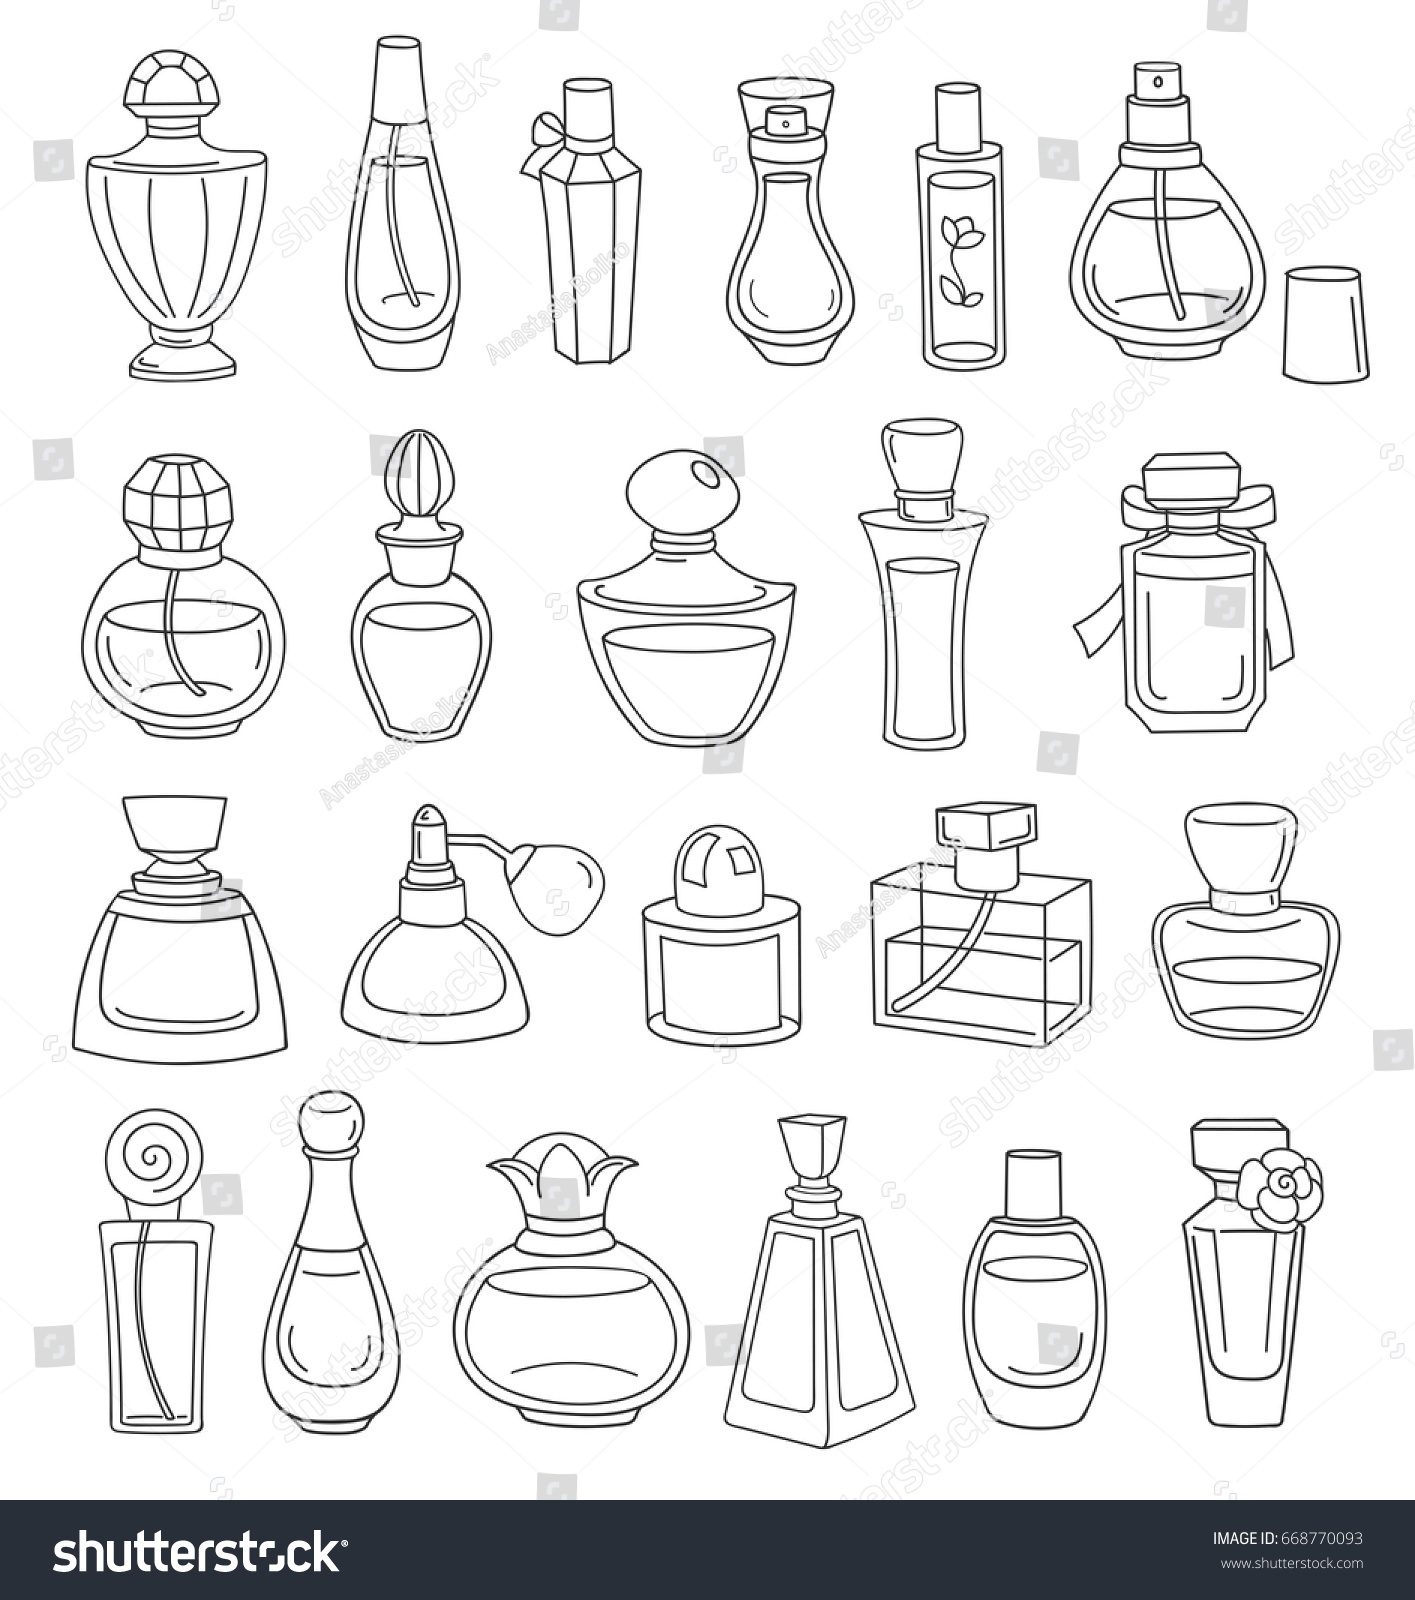 Set Of Different Uncolored Perfume Bottles Hand Drawn Retro Doodle Outline Different Shapes